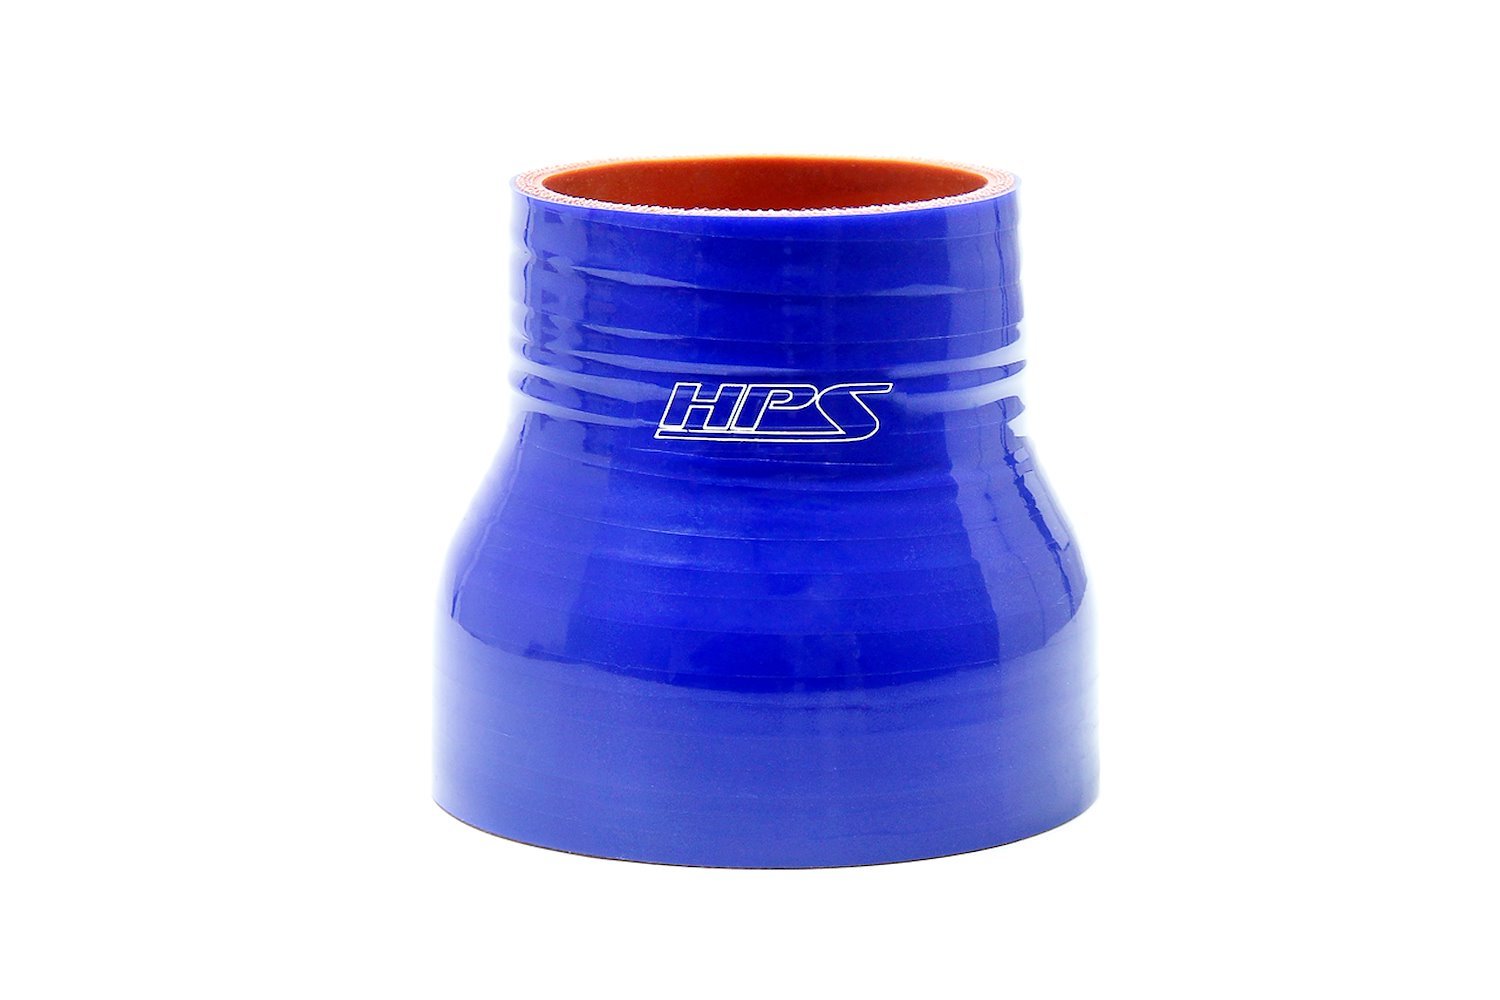 HTSR-200-238-BLUE Silicone Reducer Hose, High-Temp 4-Ply Reinforced, 2 in. - 2-3/8 in. ID, 3 in. Long, Blue